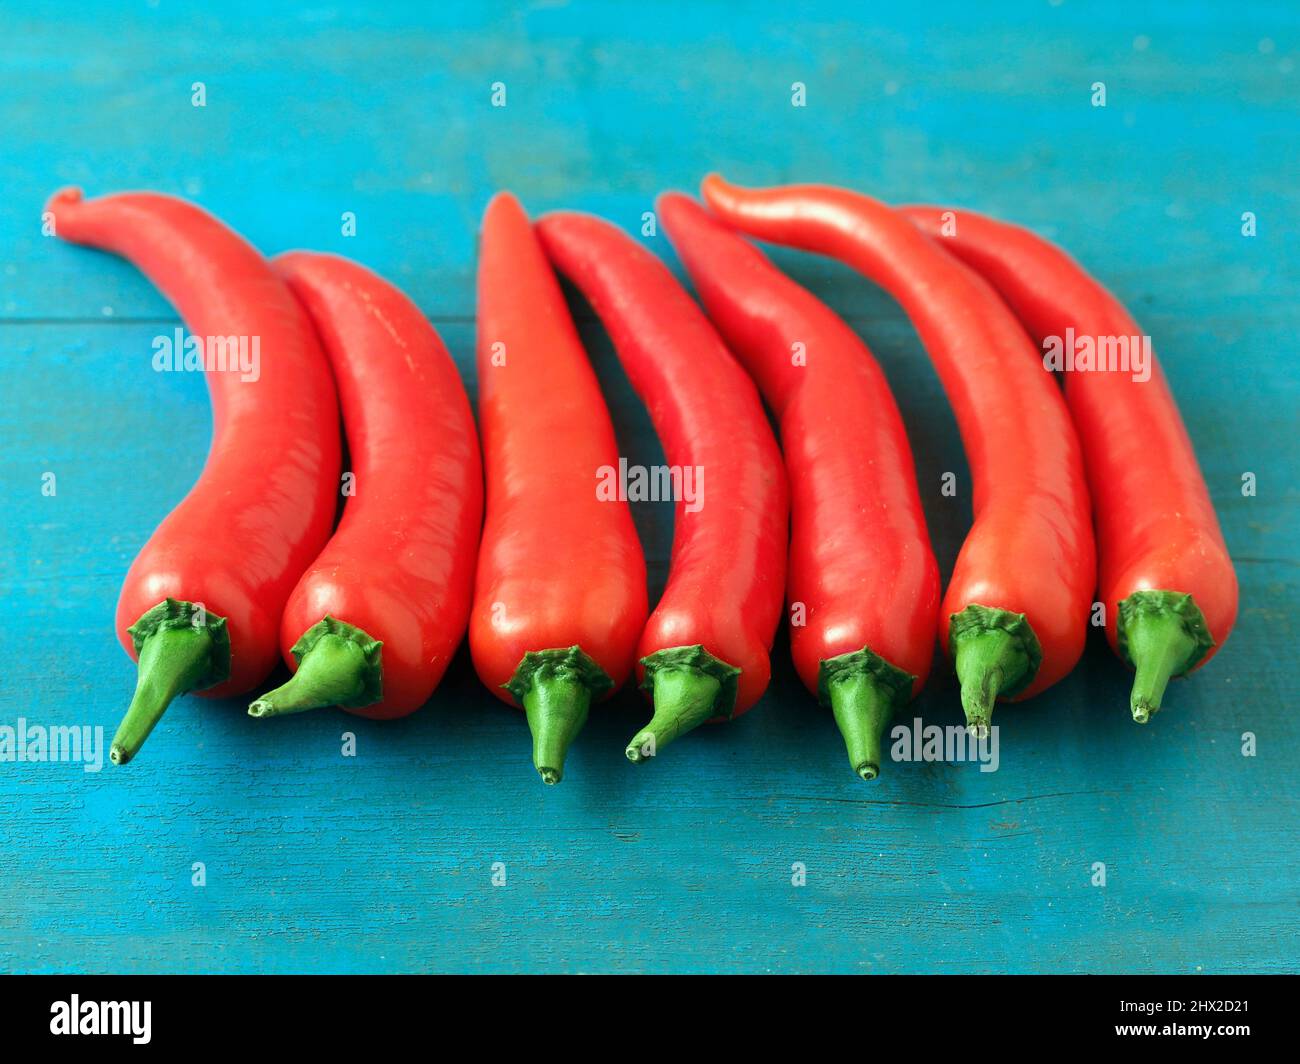 Red hot chilli peppers. Stock Photo